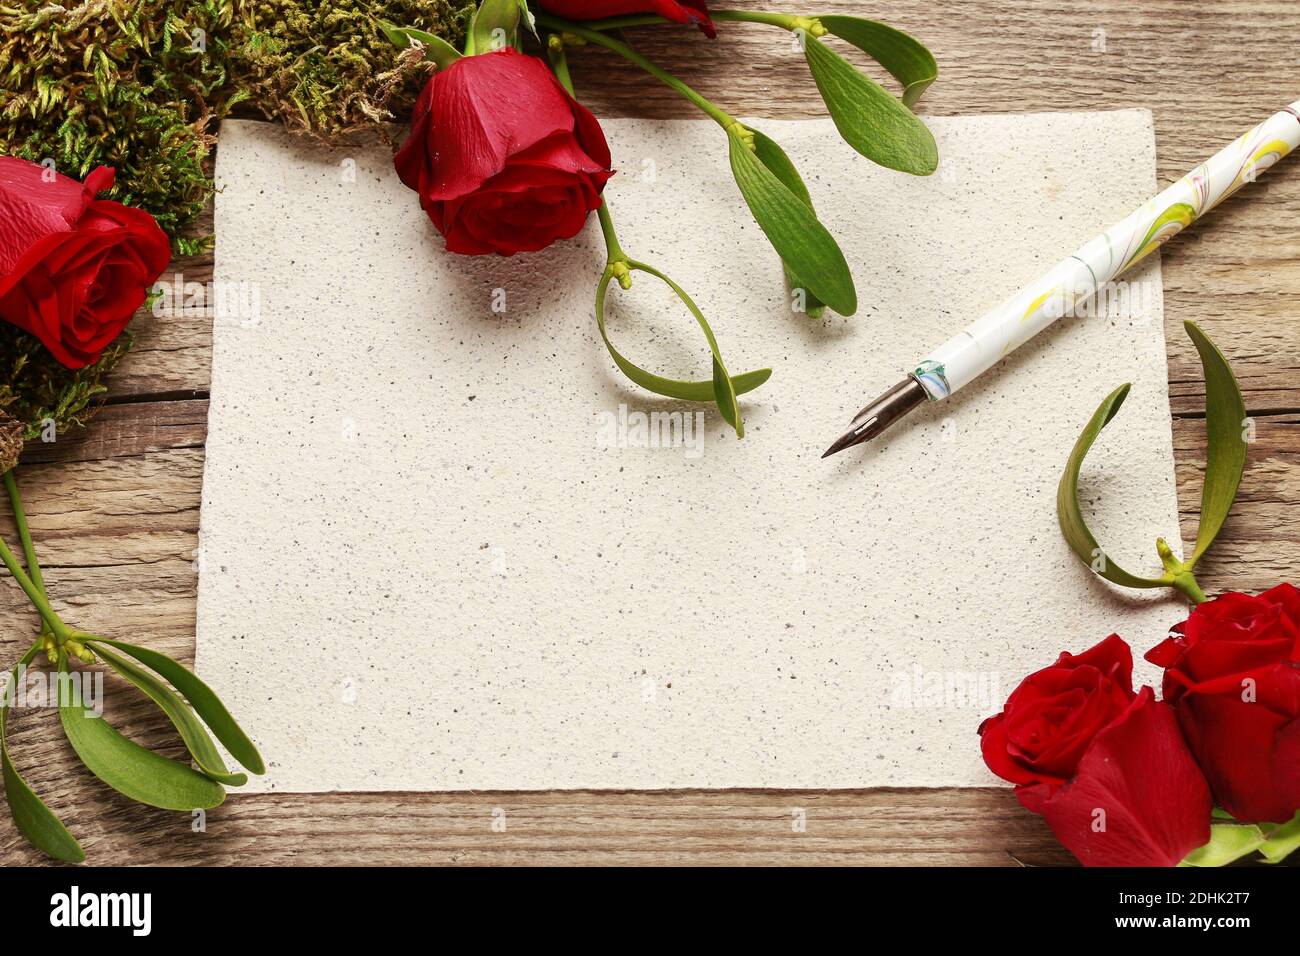 Red roses, mistletoe, moss and blank sheet of paper. Graphic resources Stock Photo